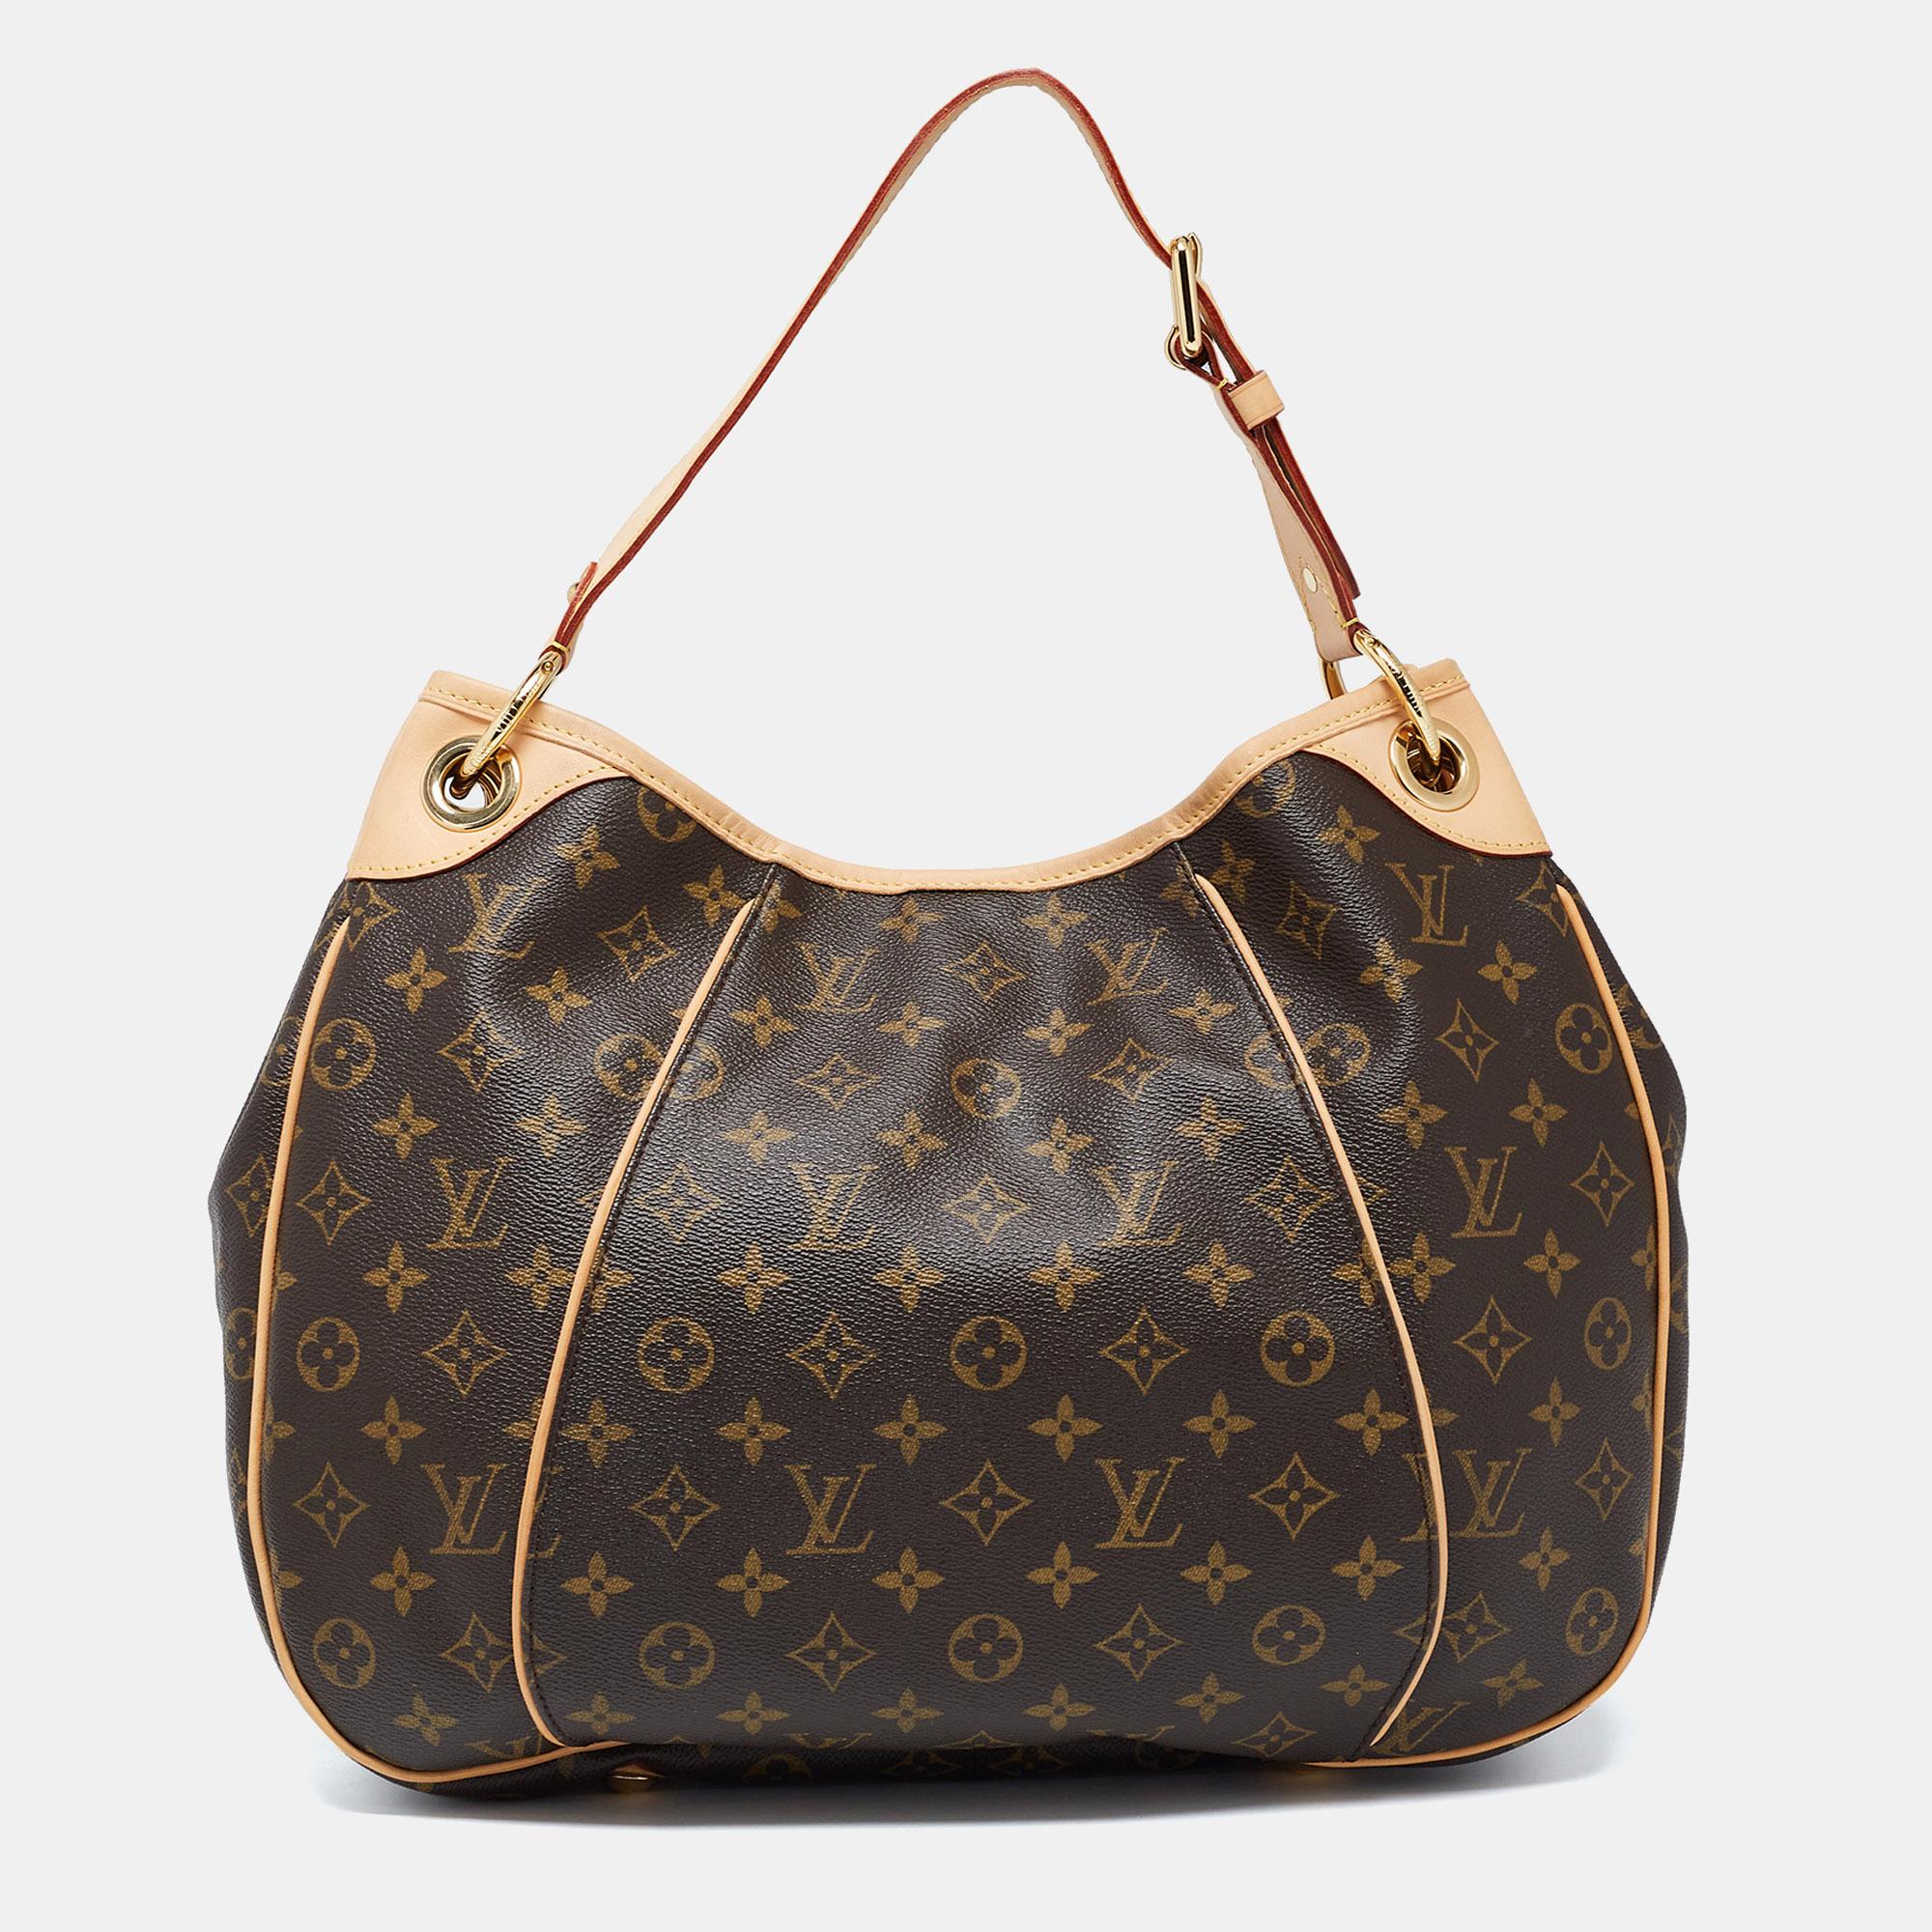 Ensure your day's essentials are in order and your outfit is complete with this Louis Vuitton Galliera. Crafted using Monogram canvas & leather, the bag has a single handle, the brand plaque on the front, and an Alcantara-lined interior.

Includes: